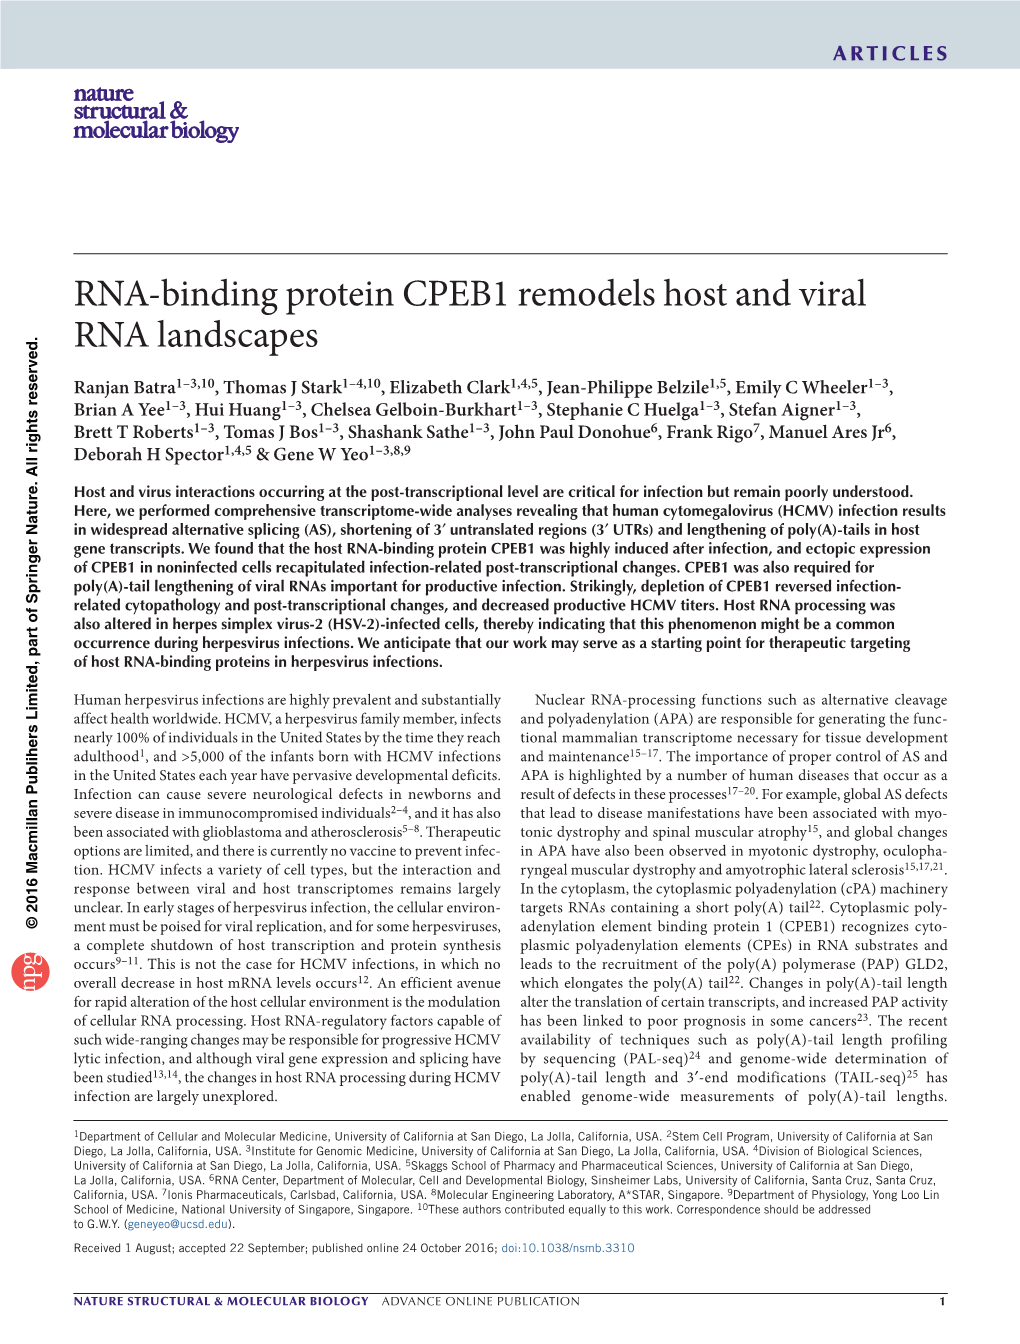 RNA-Binding Protein CPEB1 Remodels Host and Viral RNA Landscapes